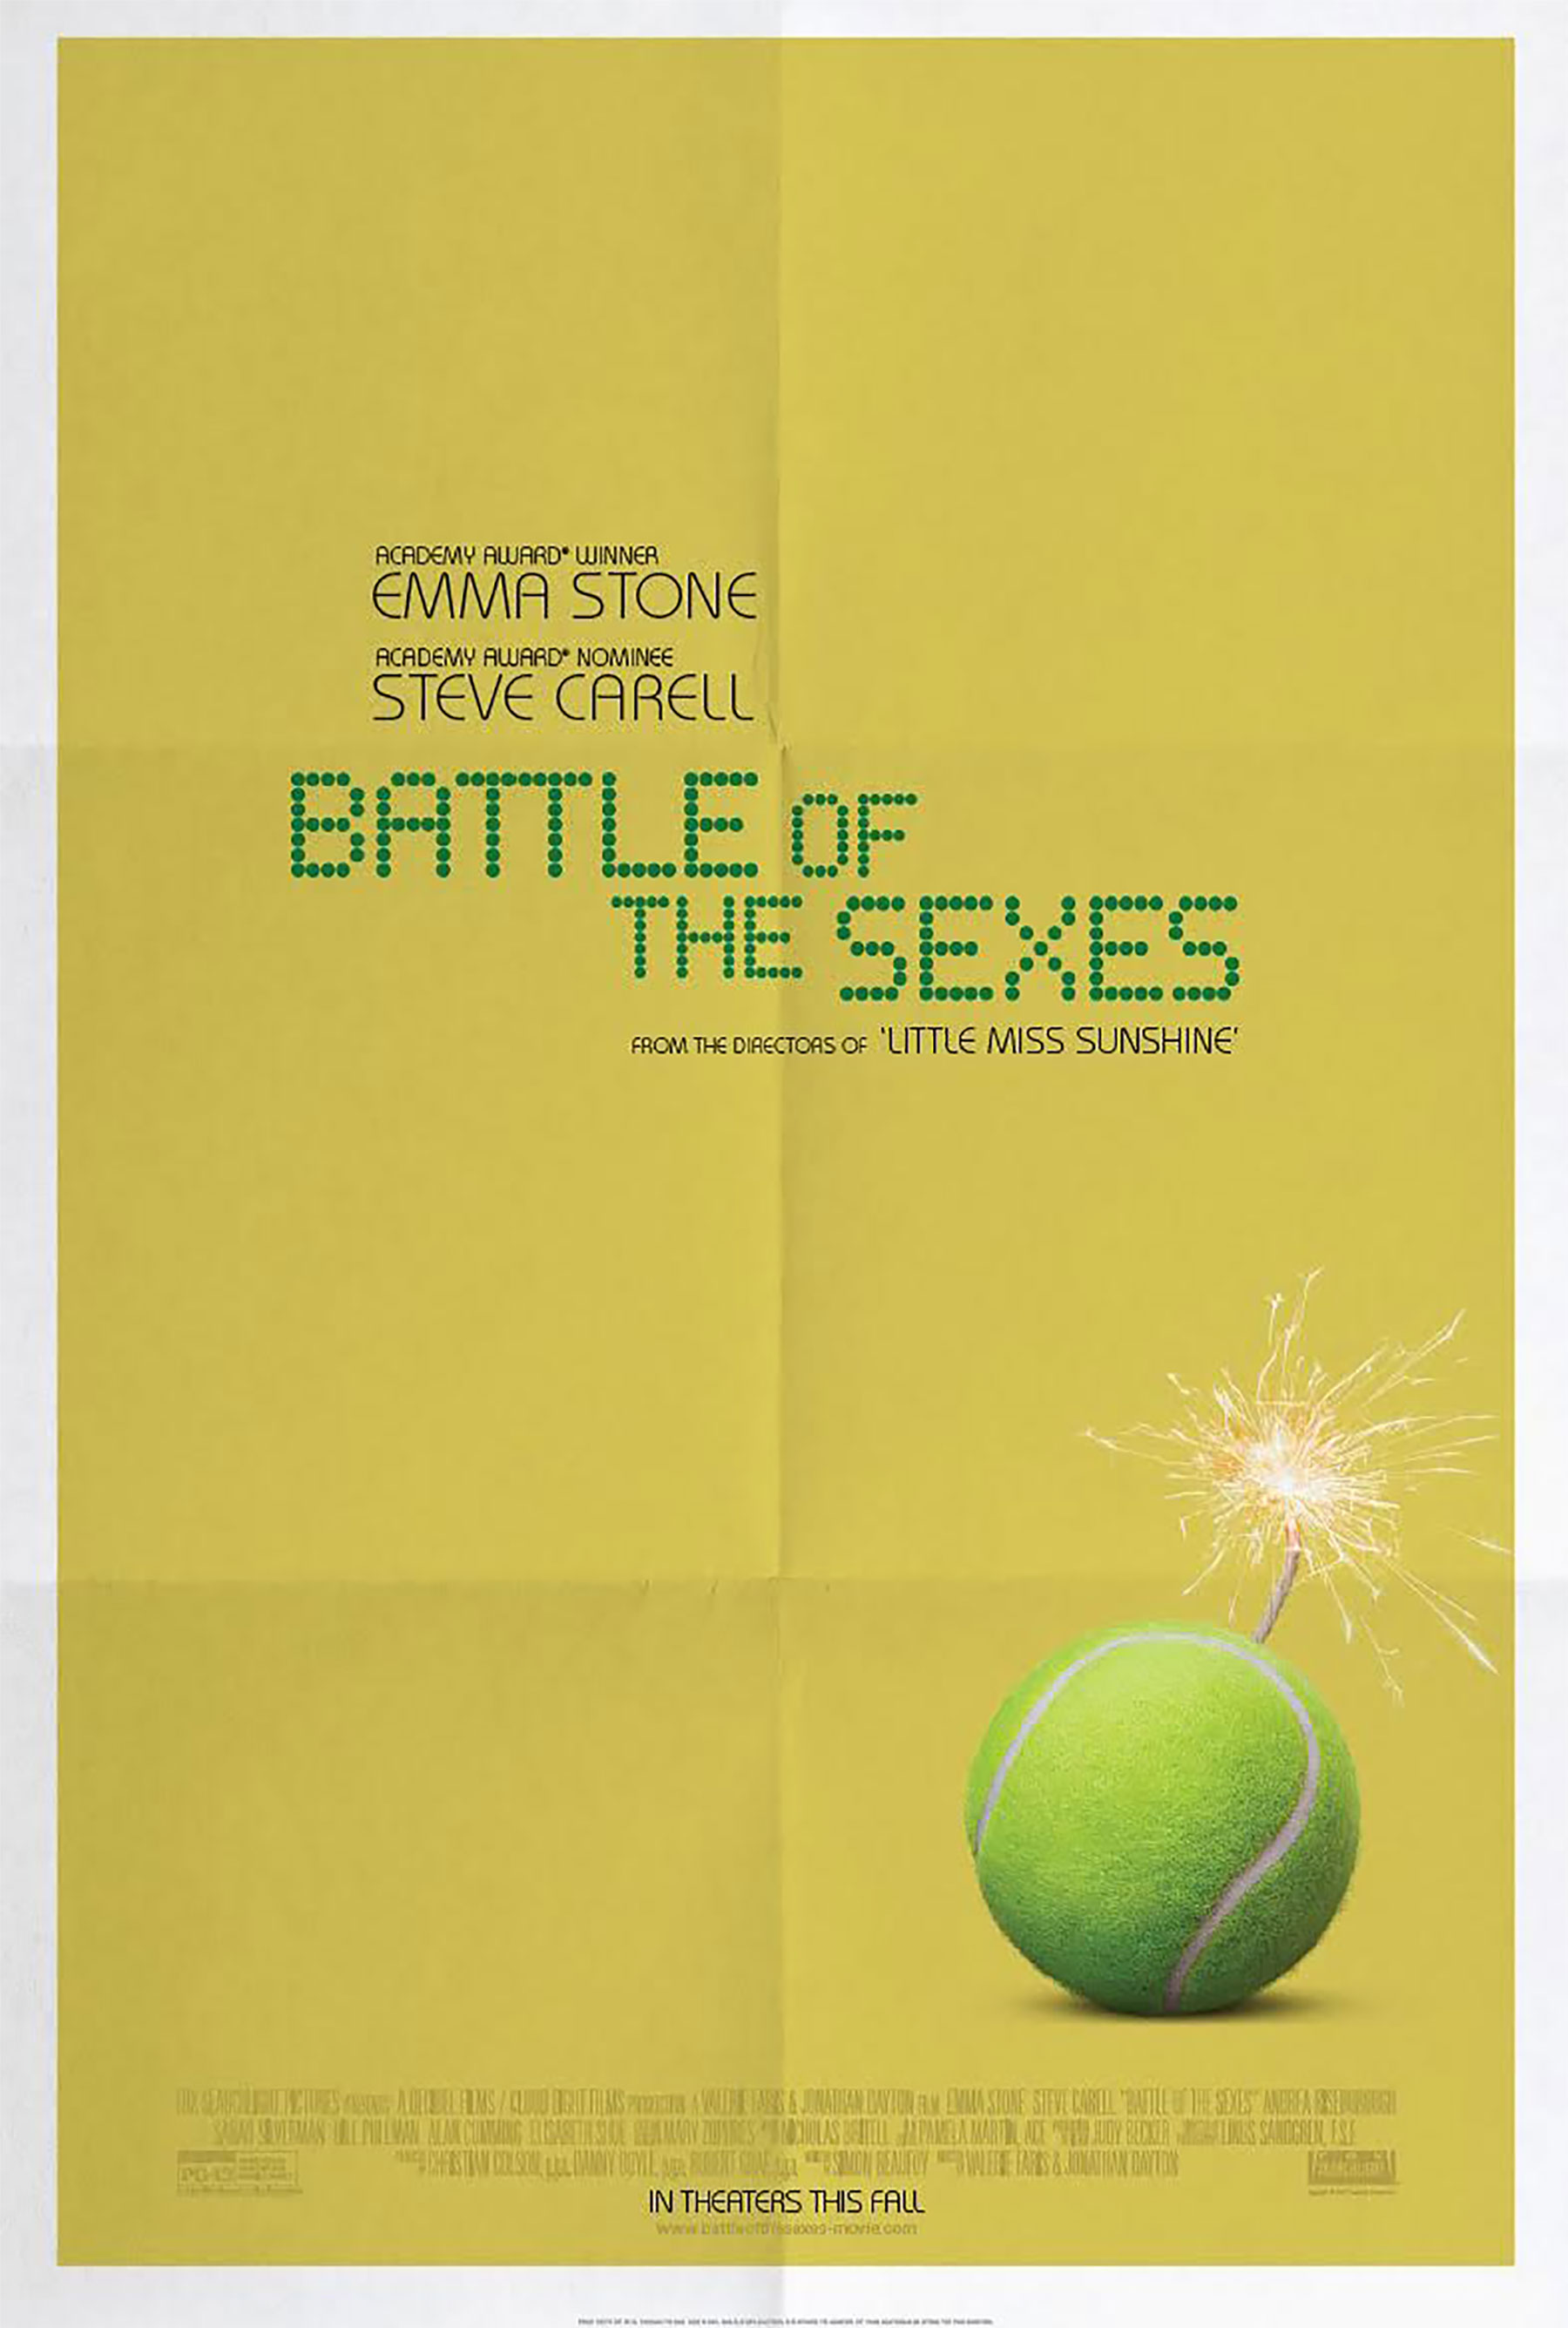 Natalie Morales Battle of the Sexes Interview - If You're Not